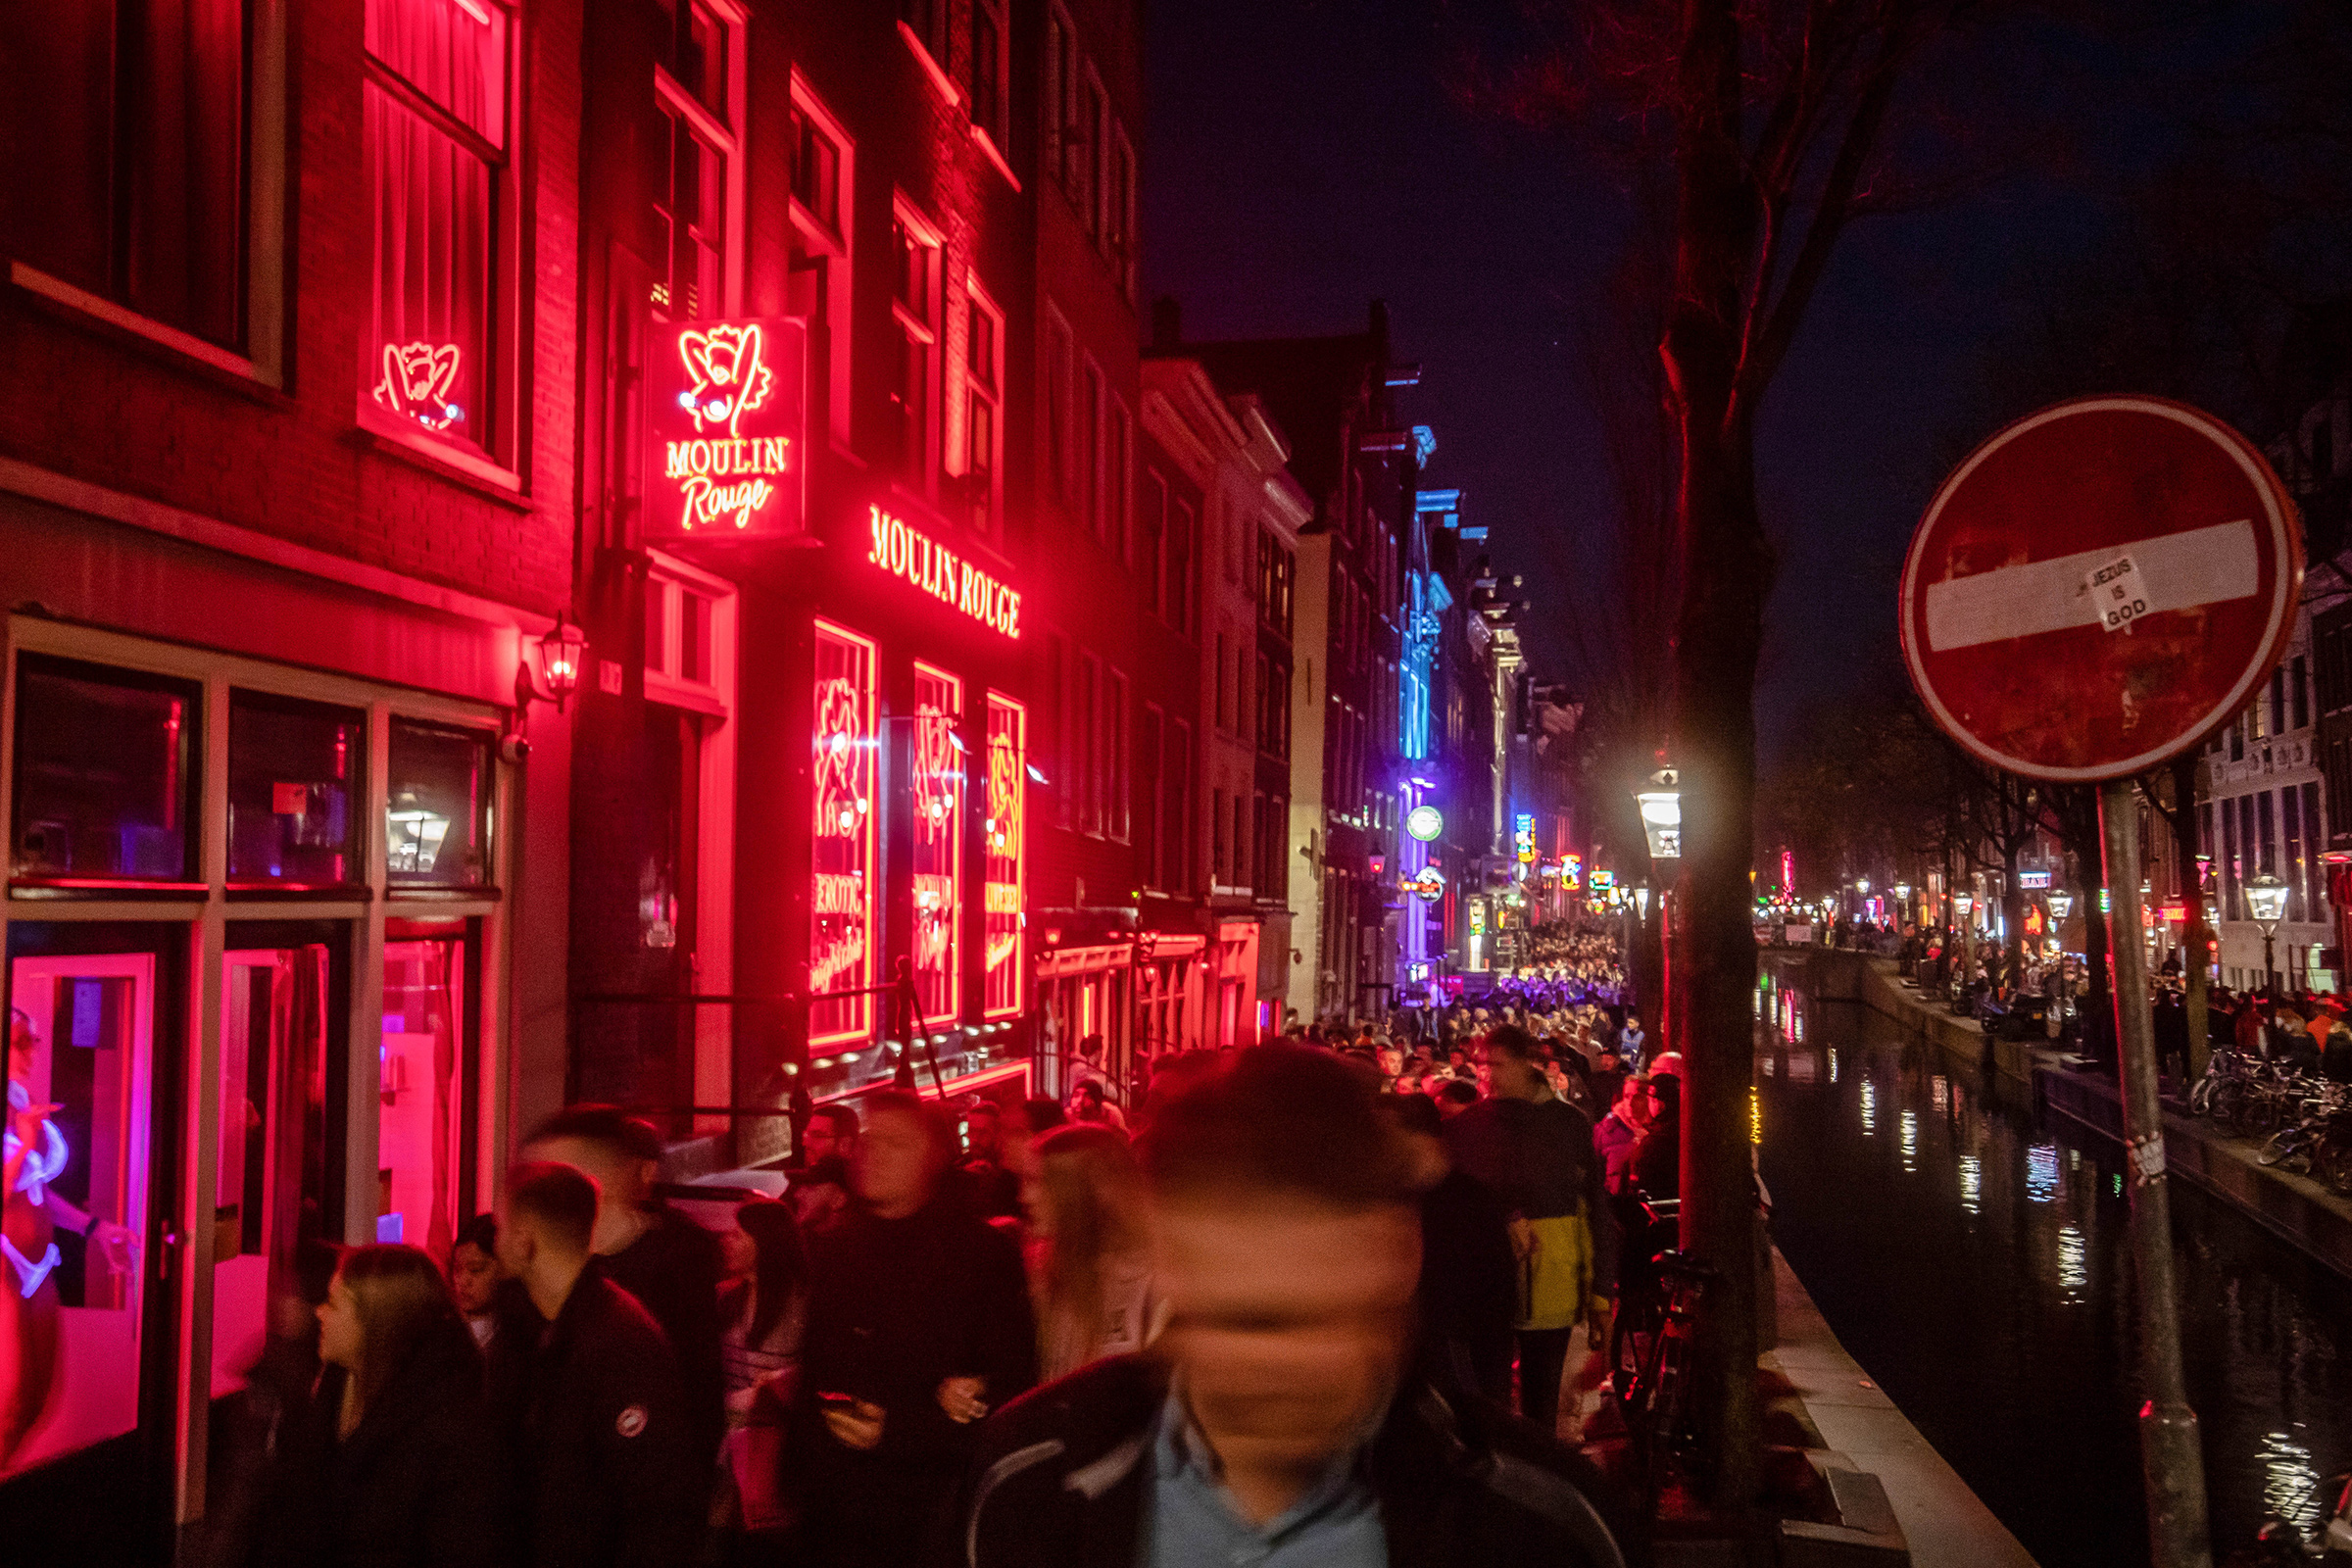 Multi-storey 'erotic centre' set to replace Amsterdam red light